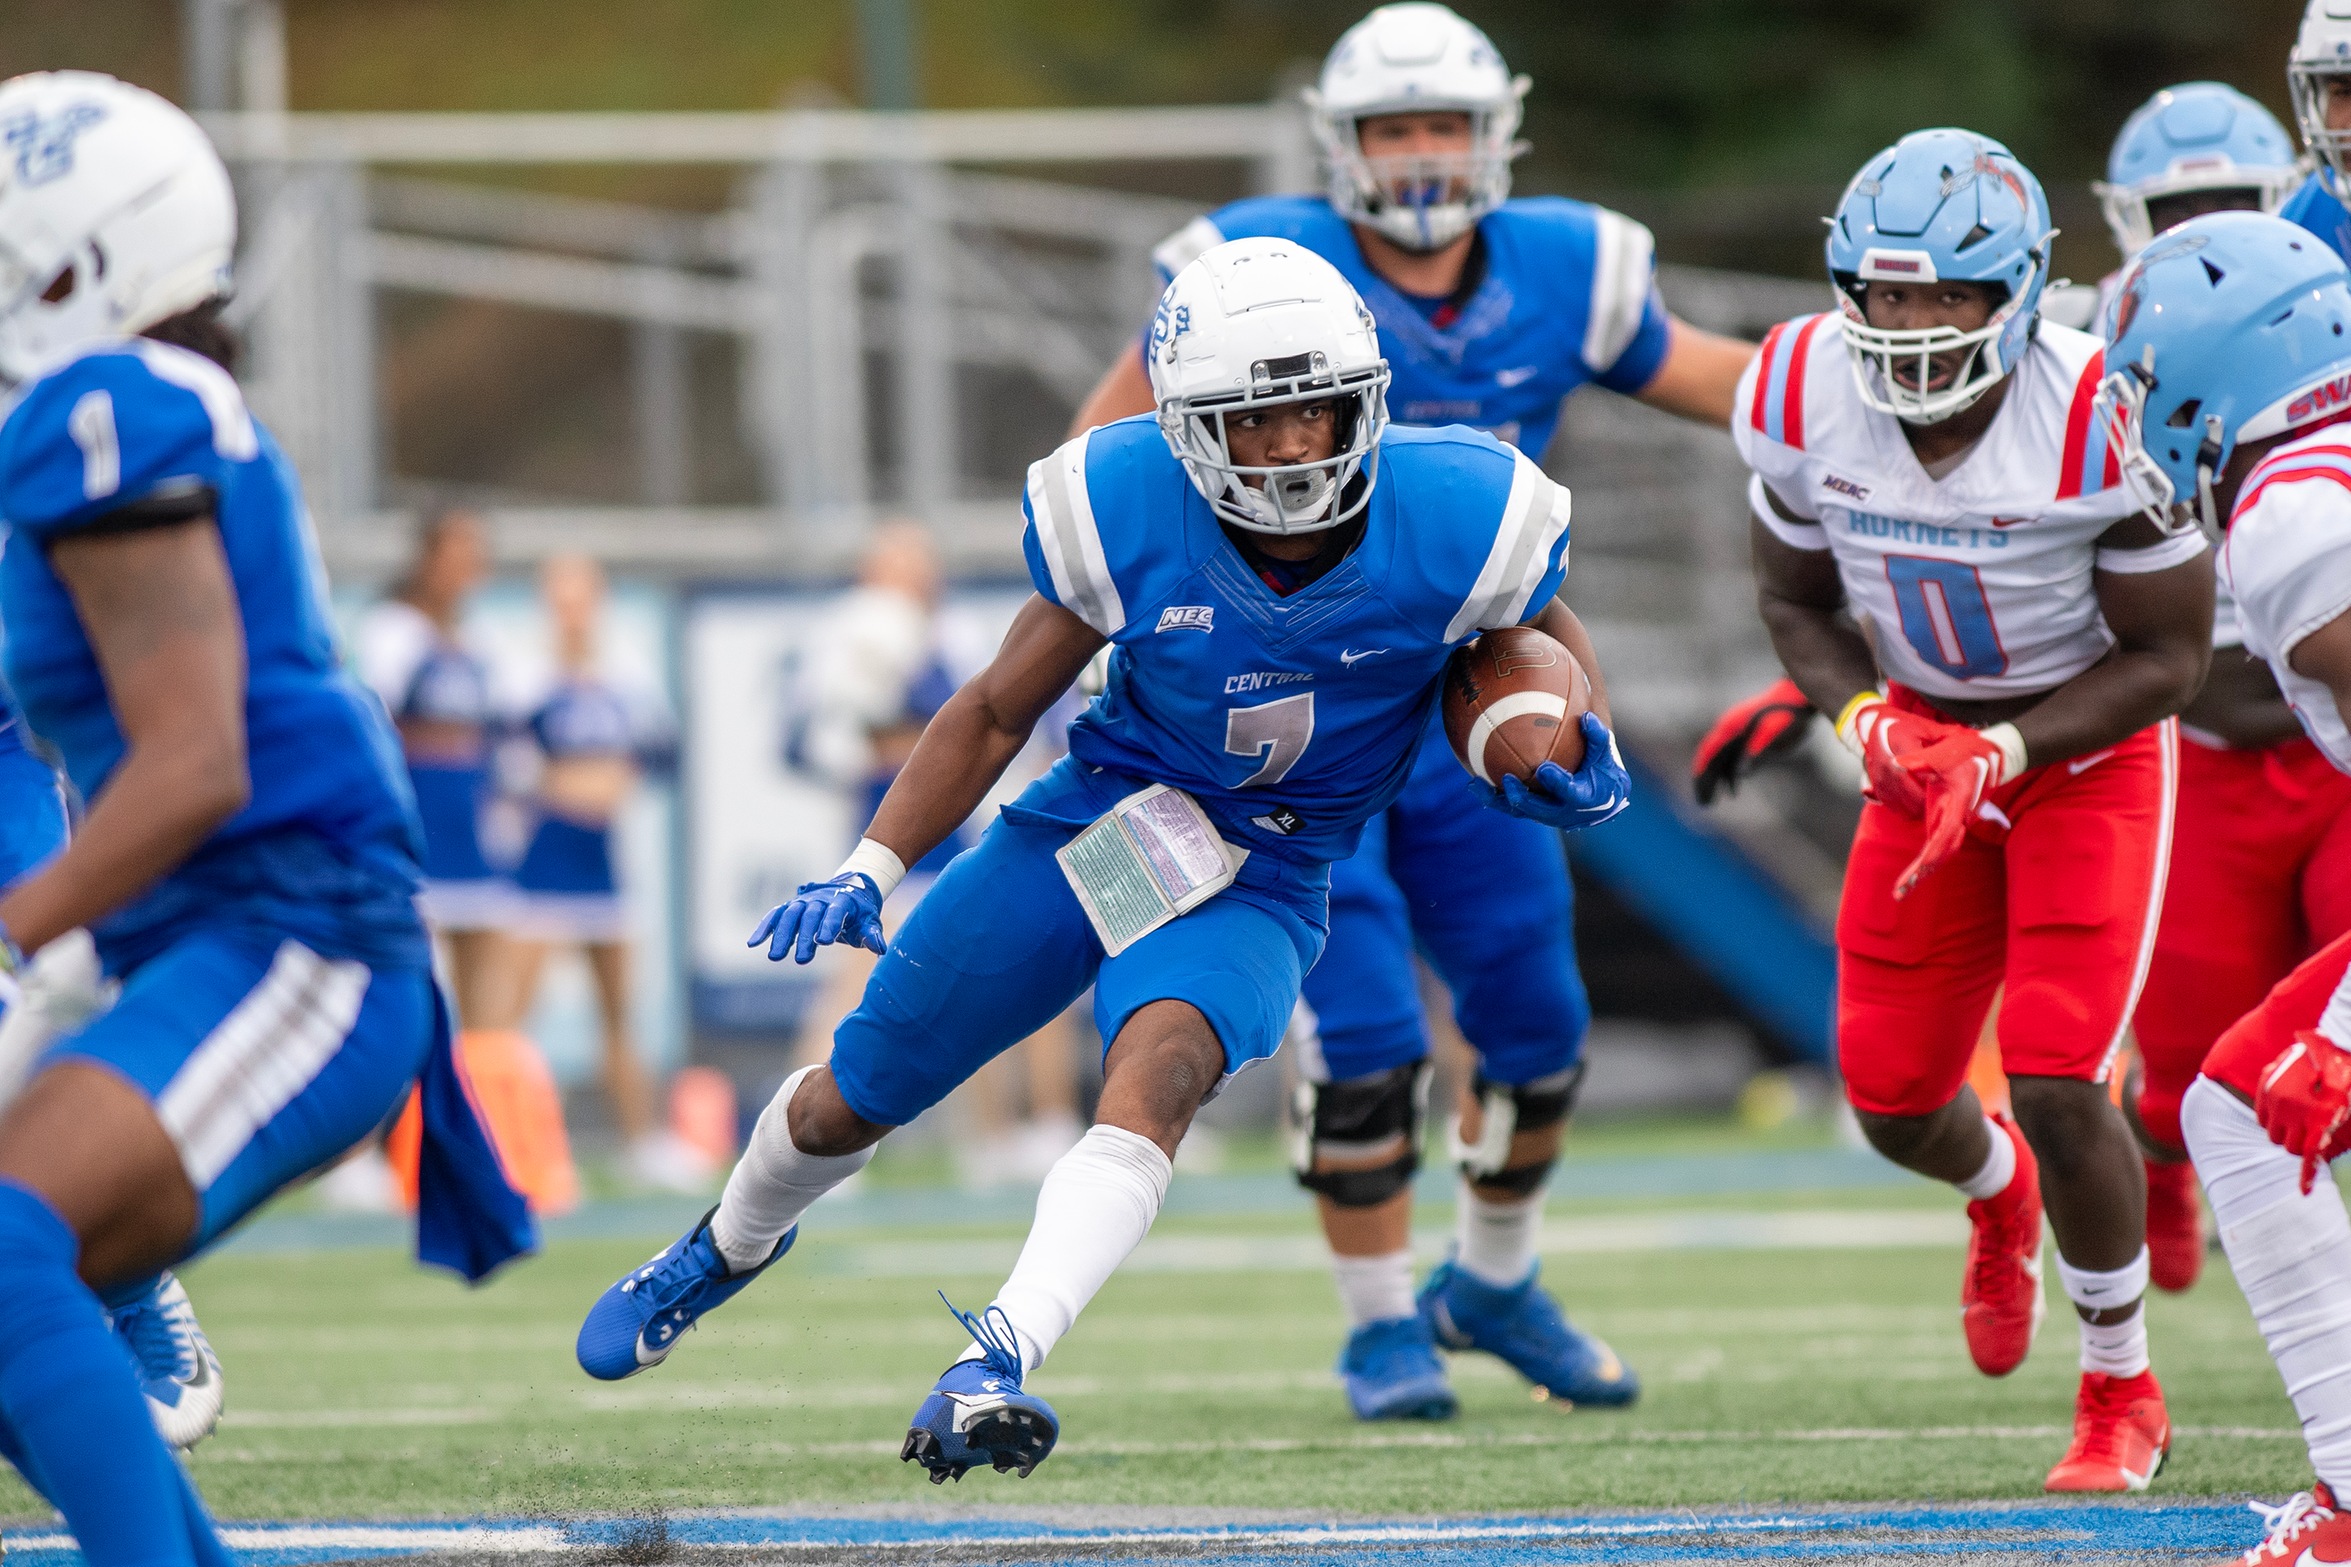 Elijah Howard was named the NEC Offensive Player of the Week on October 9th, following his 297 all-purpose yards in the Blue Devils win over Delaware State. (Photo: Steve McLaughlin)